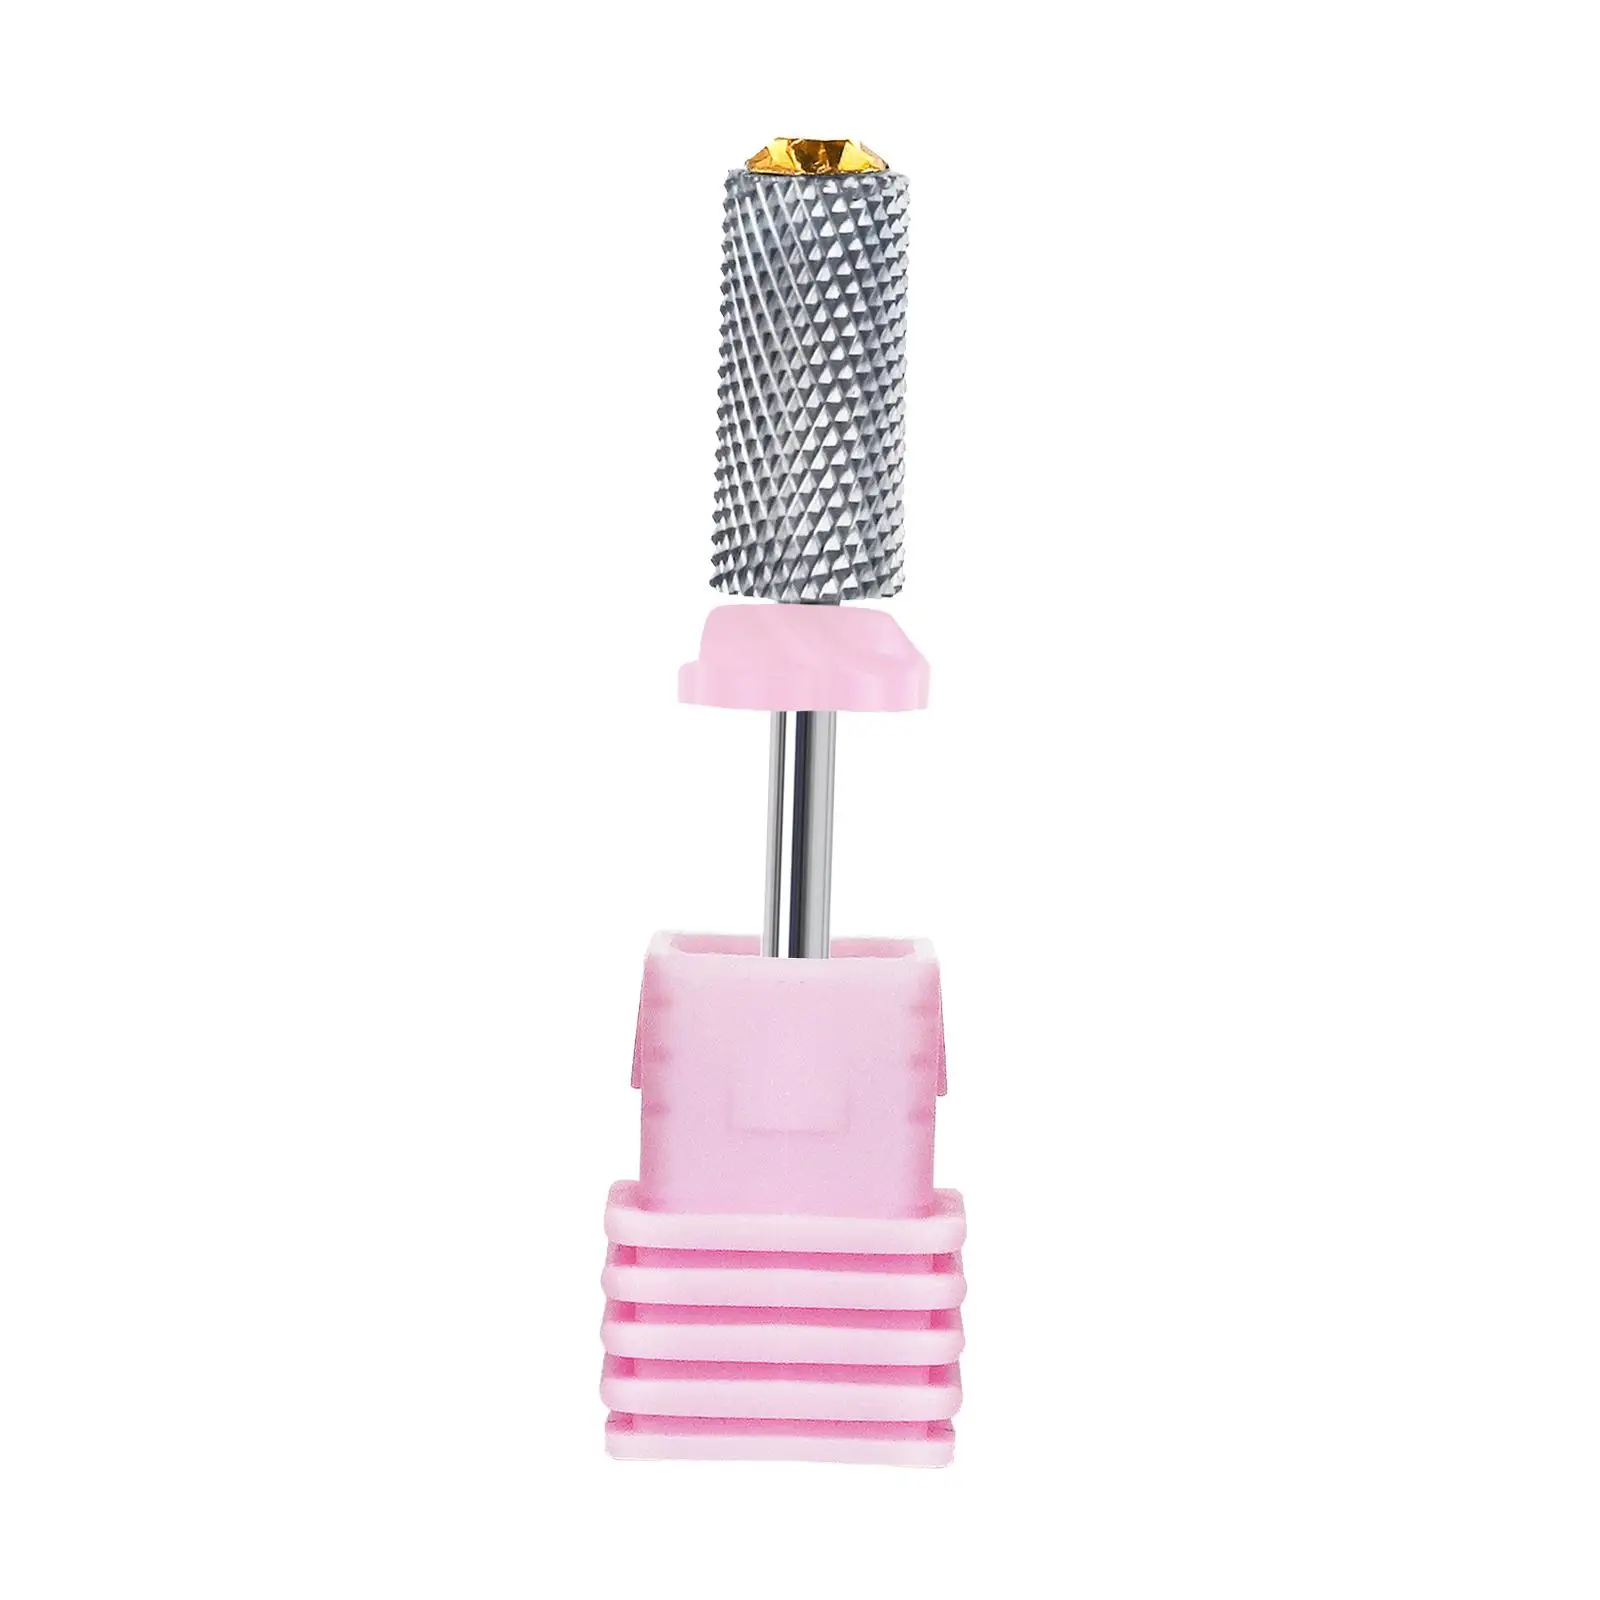 Nail Drill Bit Rotary Burrs Cuticle Remover Bit for Manicure Tool Salon Use